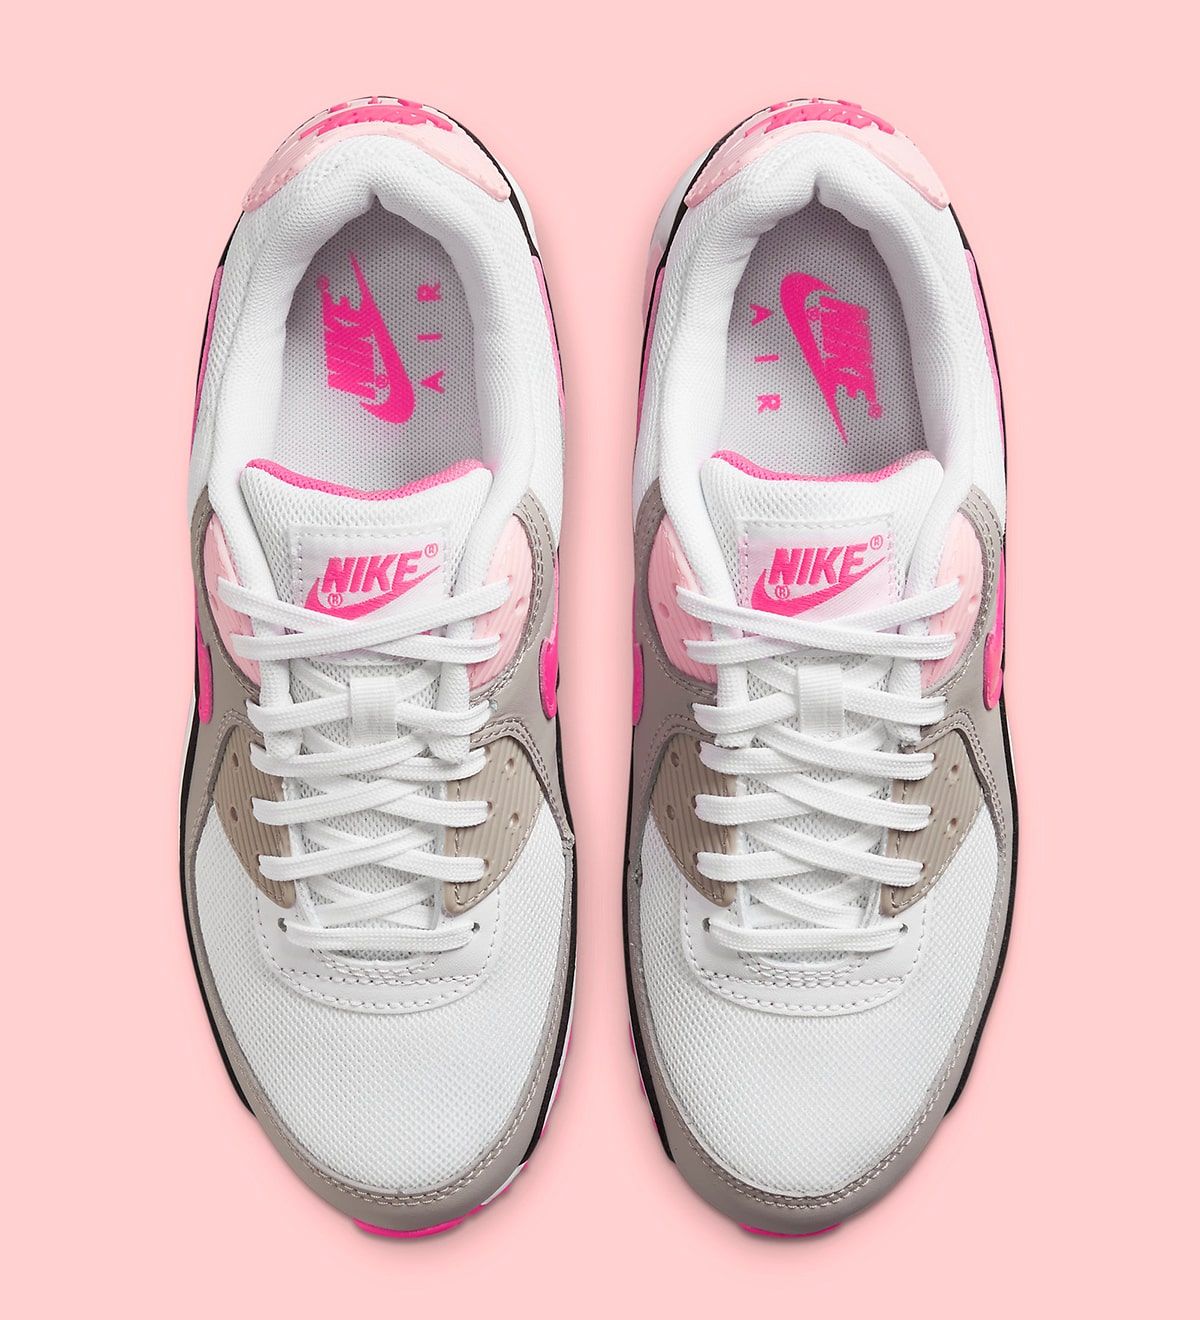 Retro-Inspired Air Max 90 Appears with Black, Pink and Fawn Accents ...